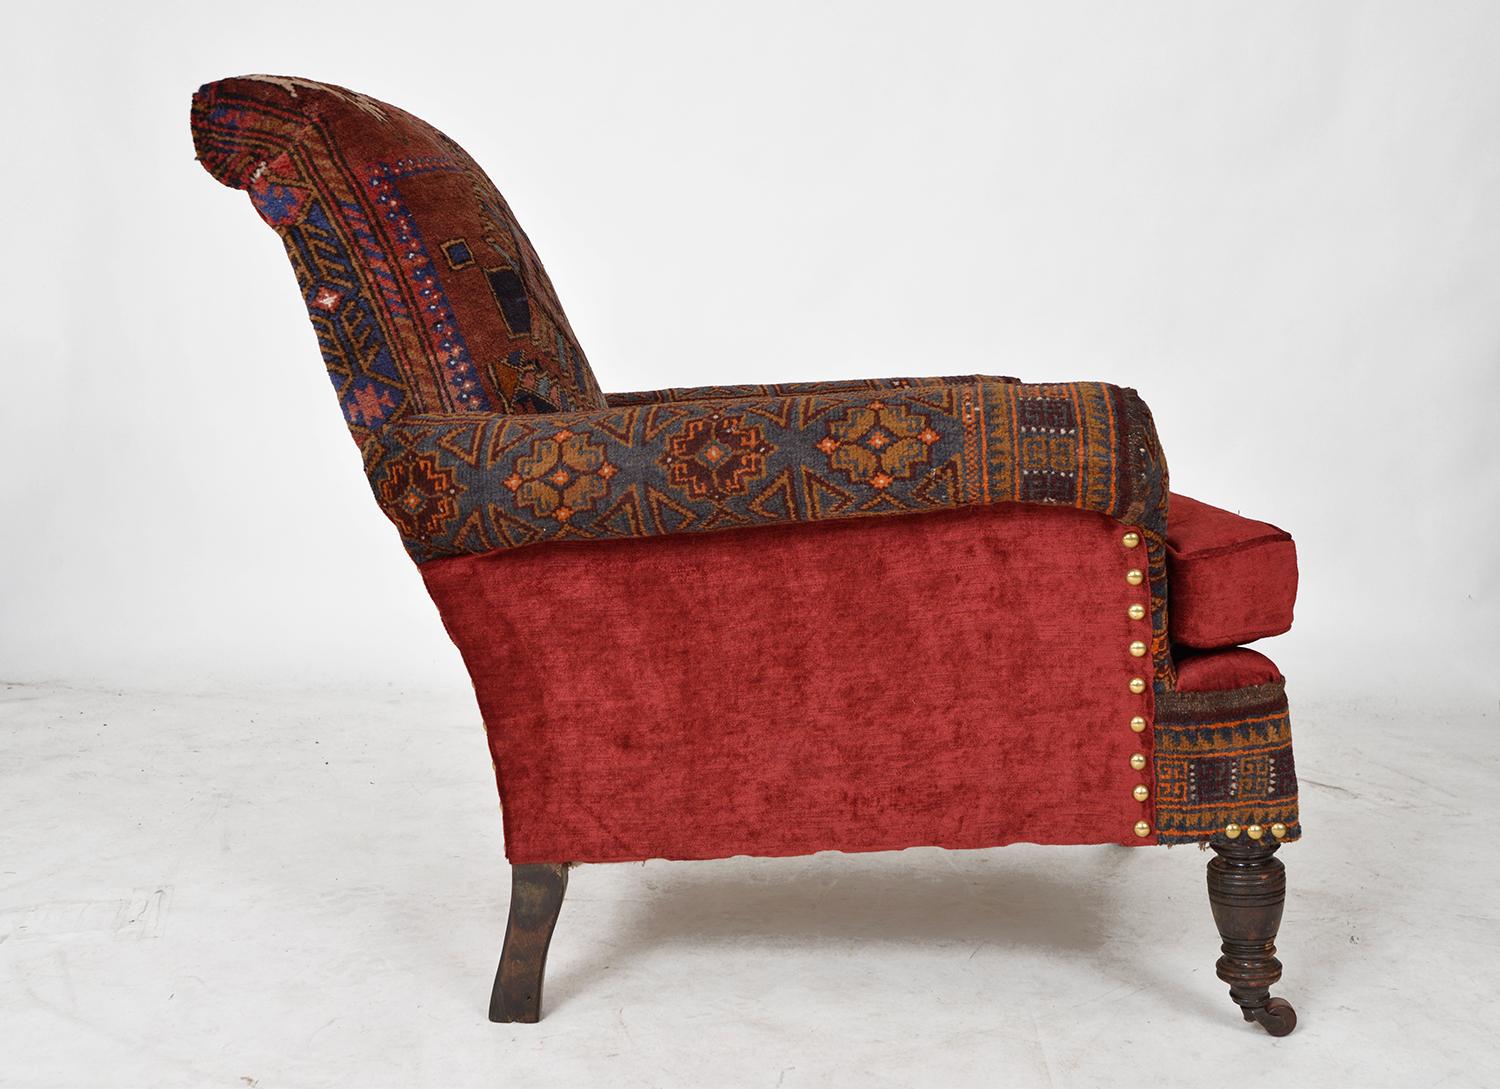 British  Antique Baluch Rug Carpet Chair Library Armchair Victorian Bohemian Upholstered